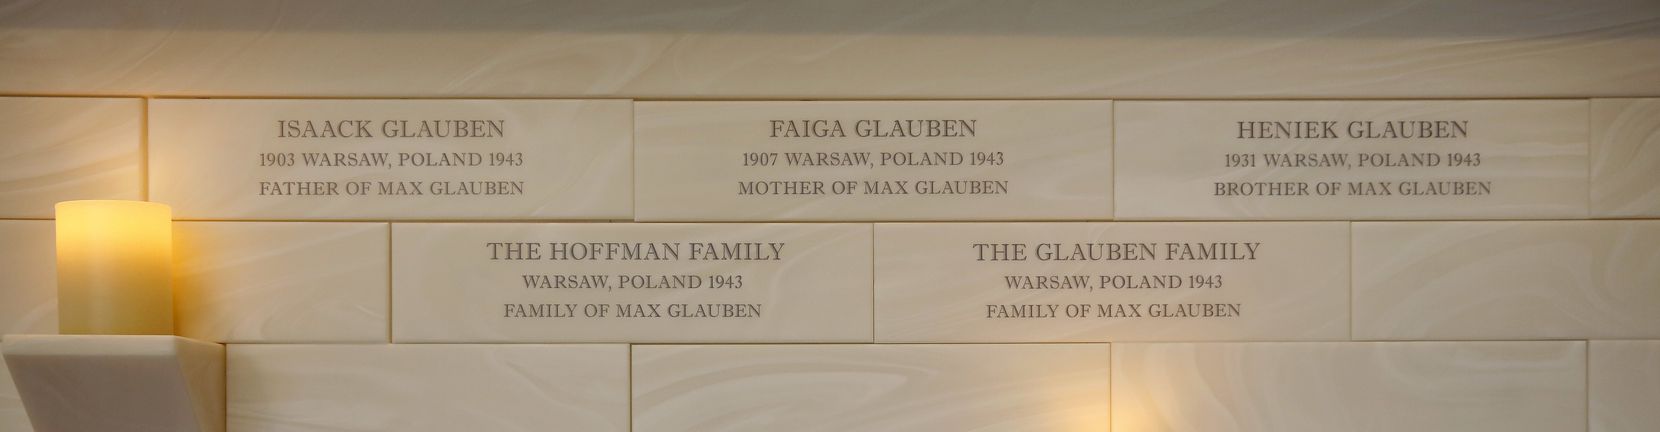 Holocaust survivor Max Glauben's family members' names (top row, from left: father Isaack,...